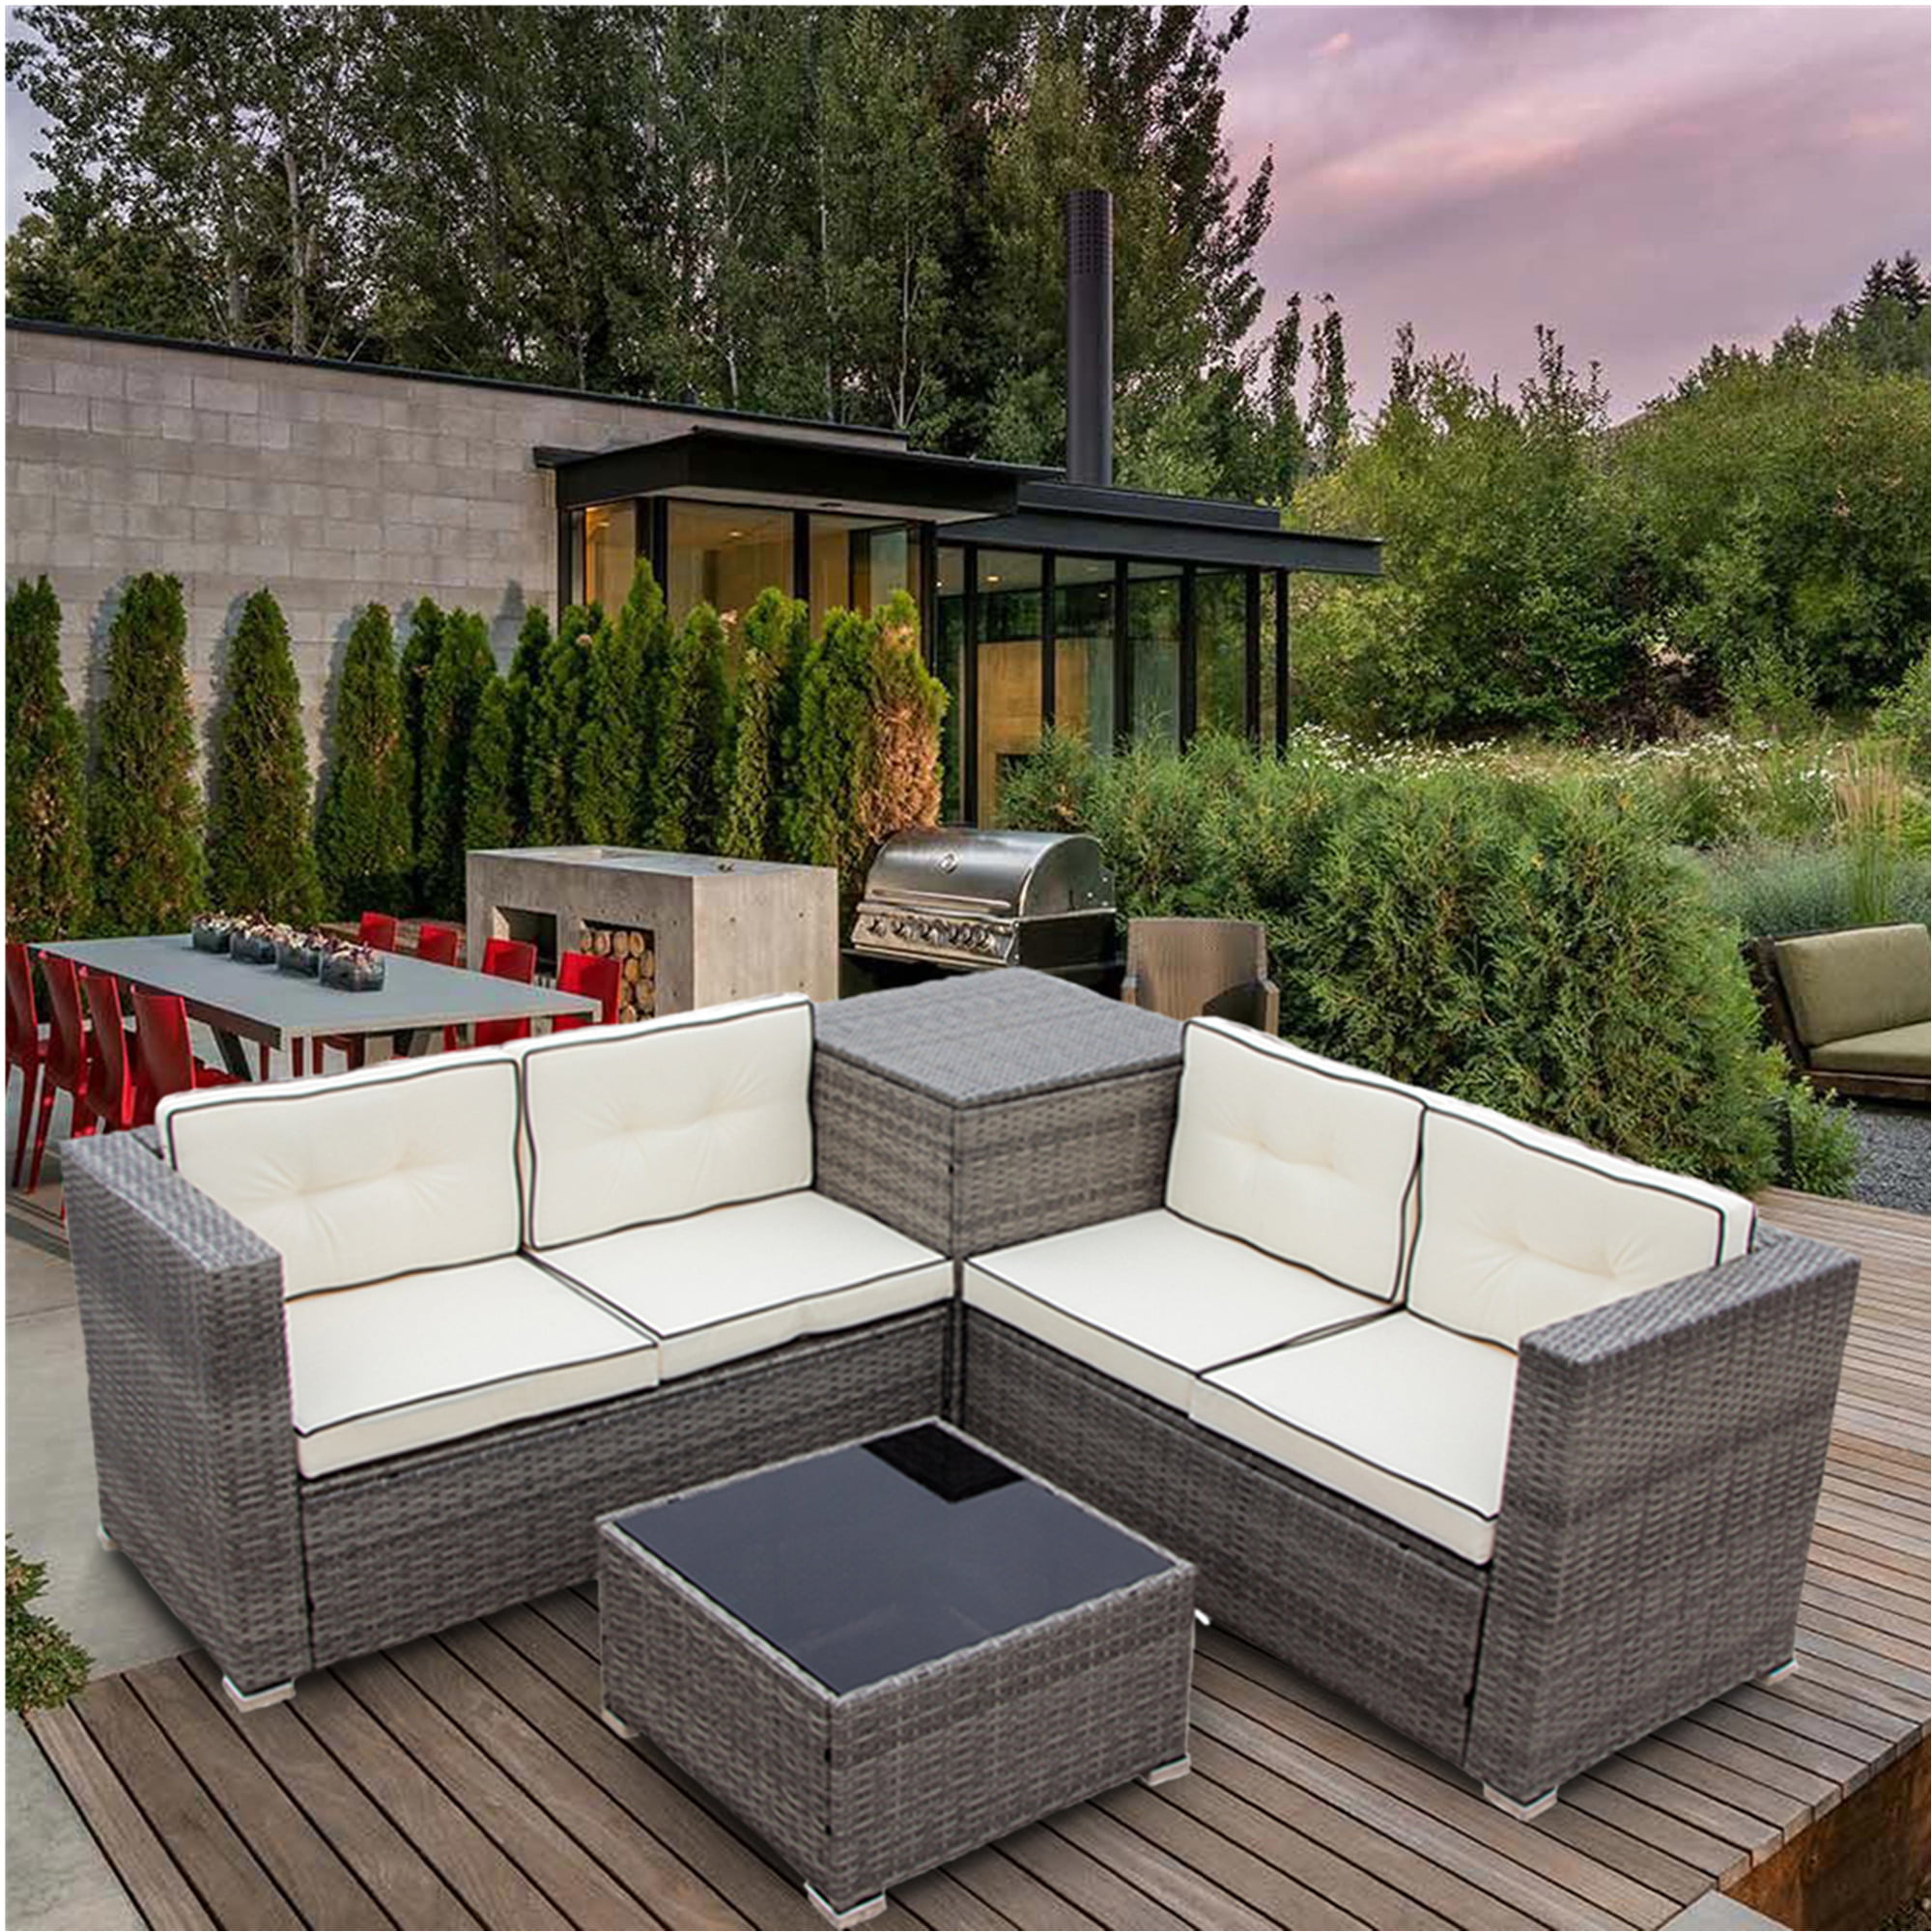 Clearance! Outdoor Patio Furniture Sets, 4 Piece Wicker